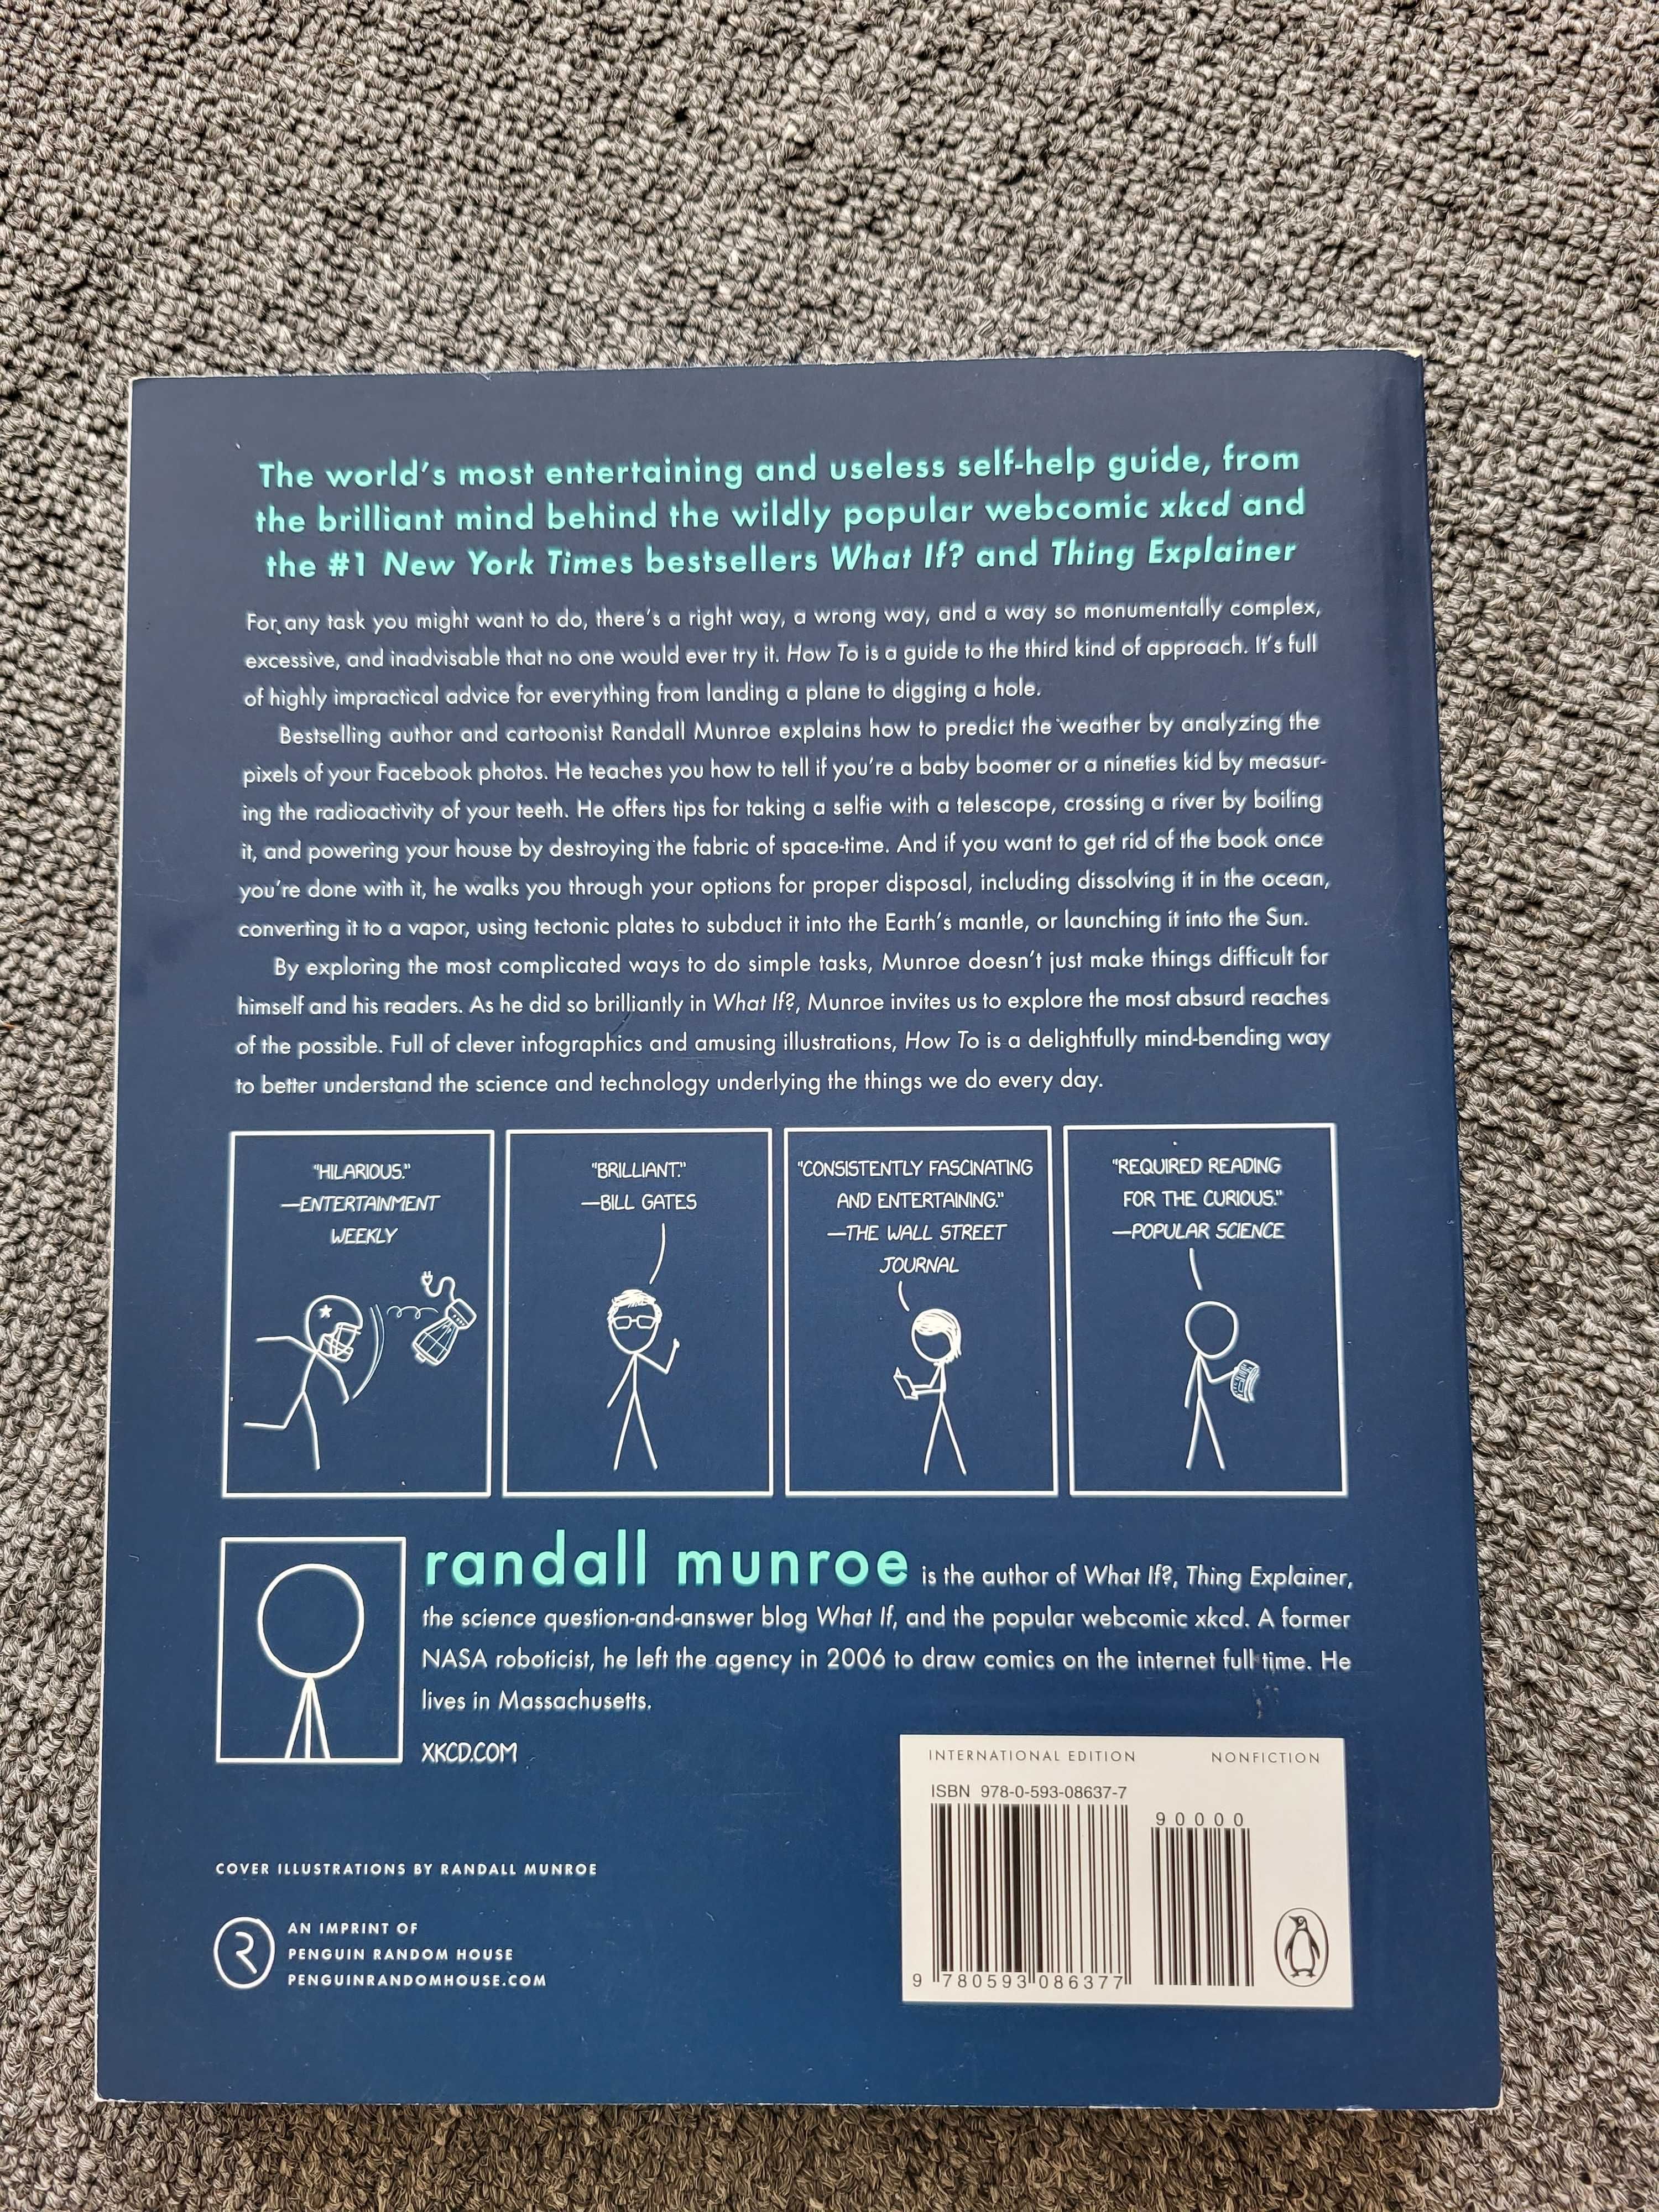 Carte ENG - How To - Randall Munroe